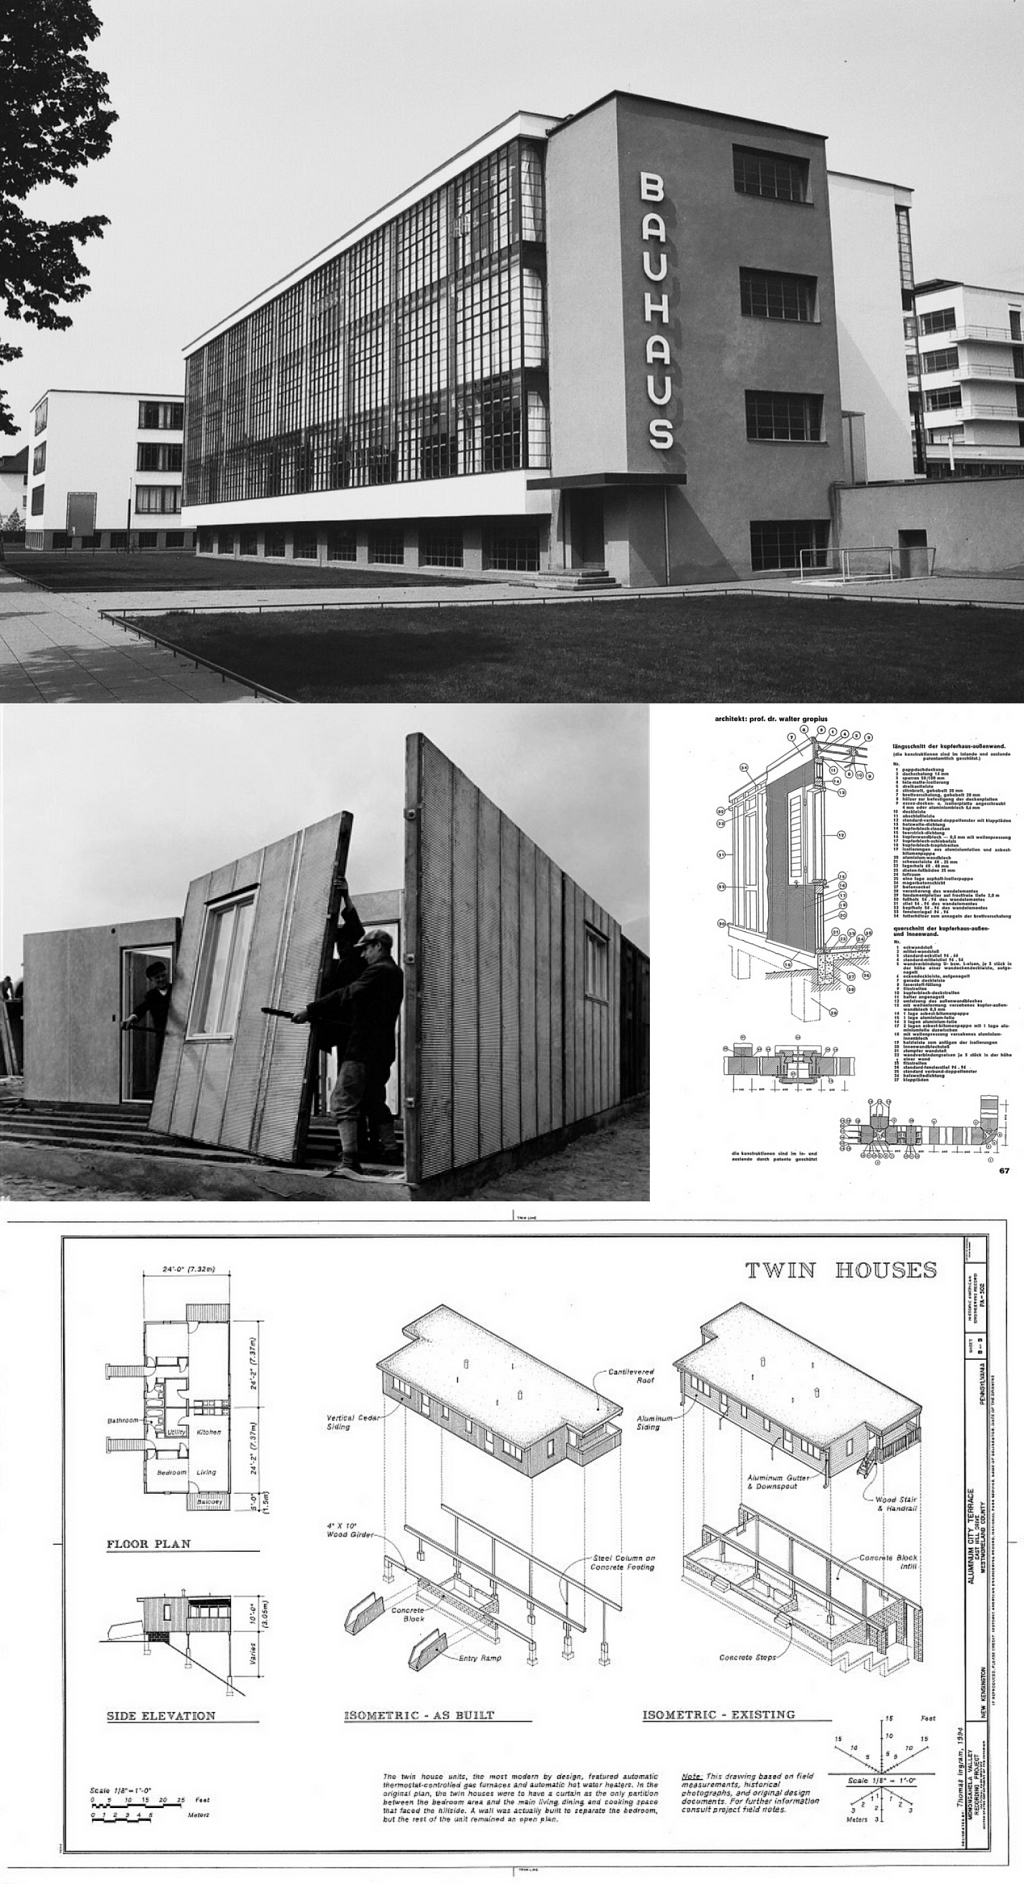 Multiple images of German design school Bauhaus (the building) as well as some of the systematic work created by architects and engineers at that time